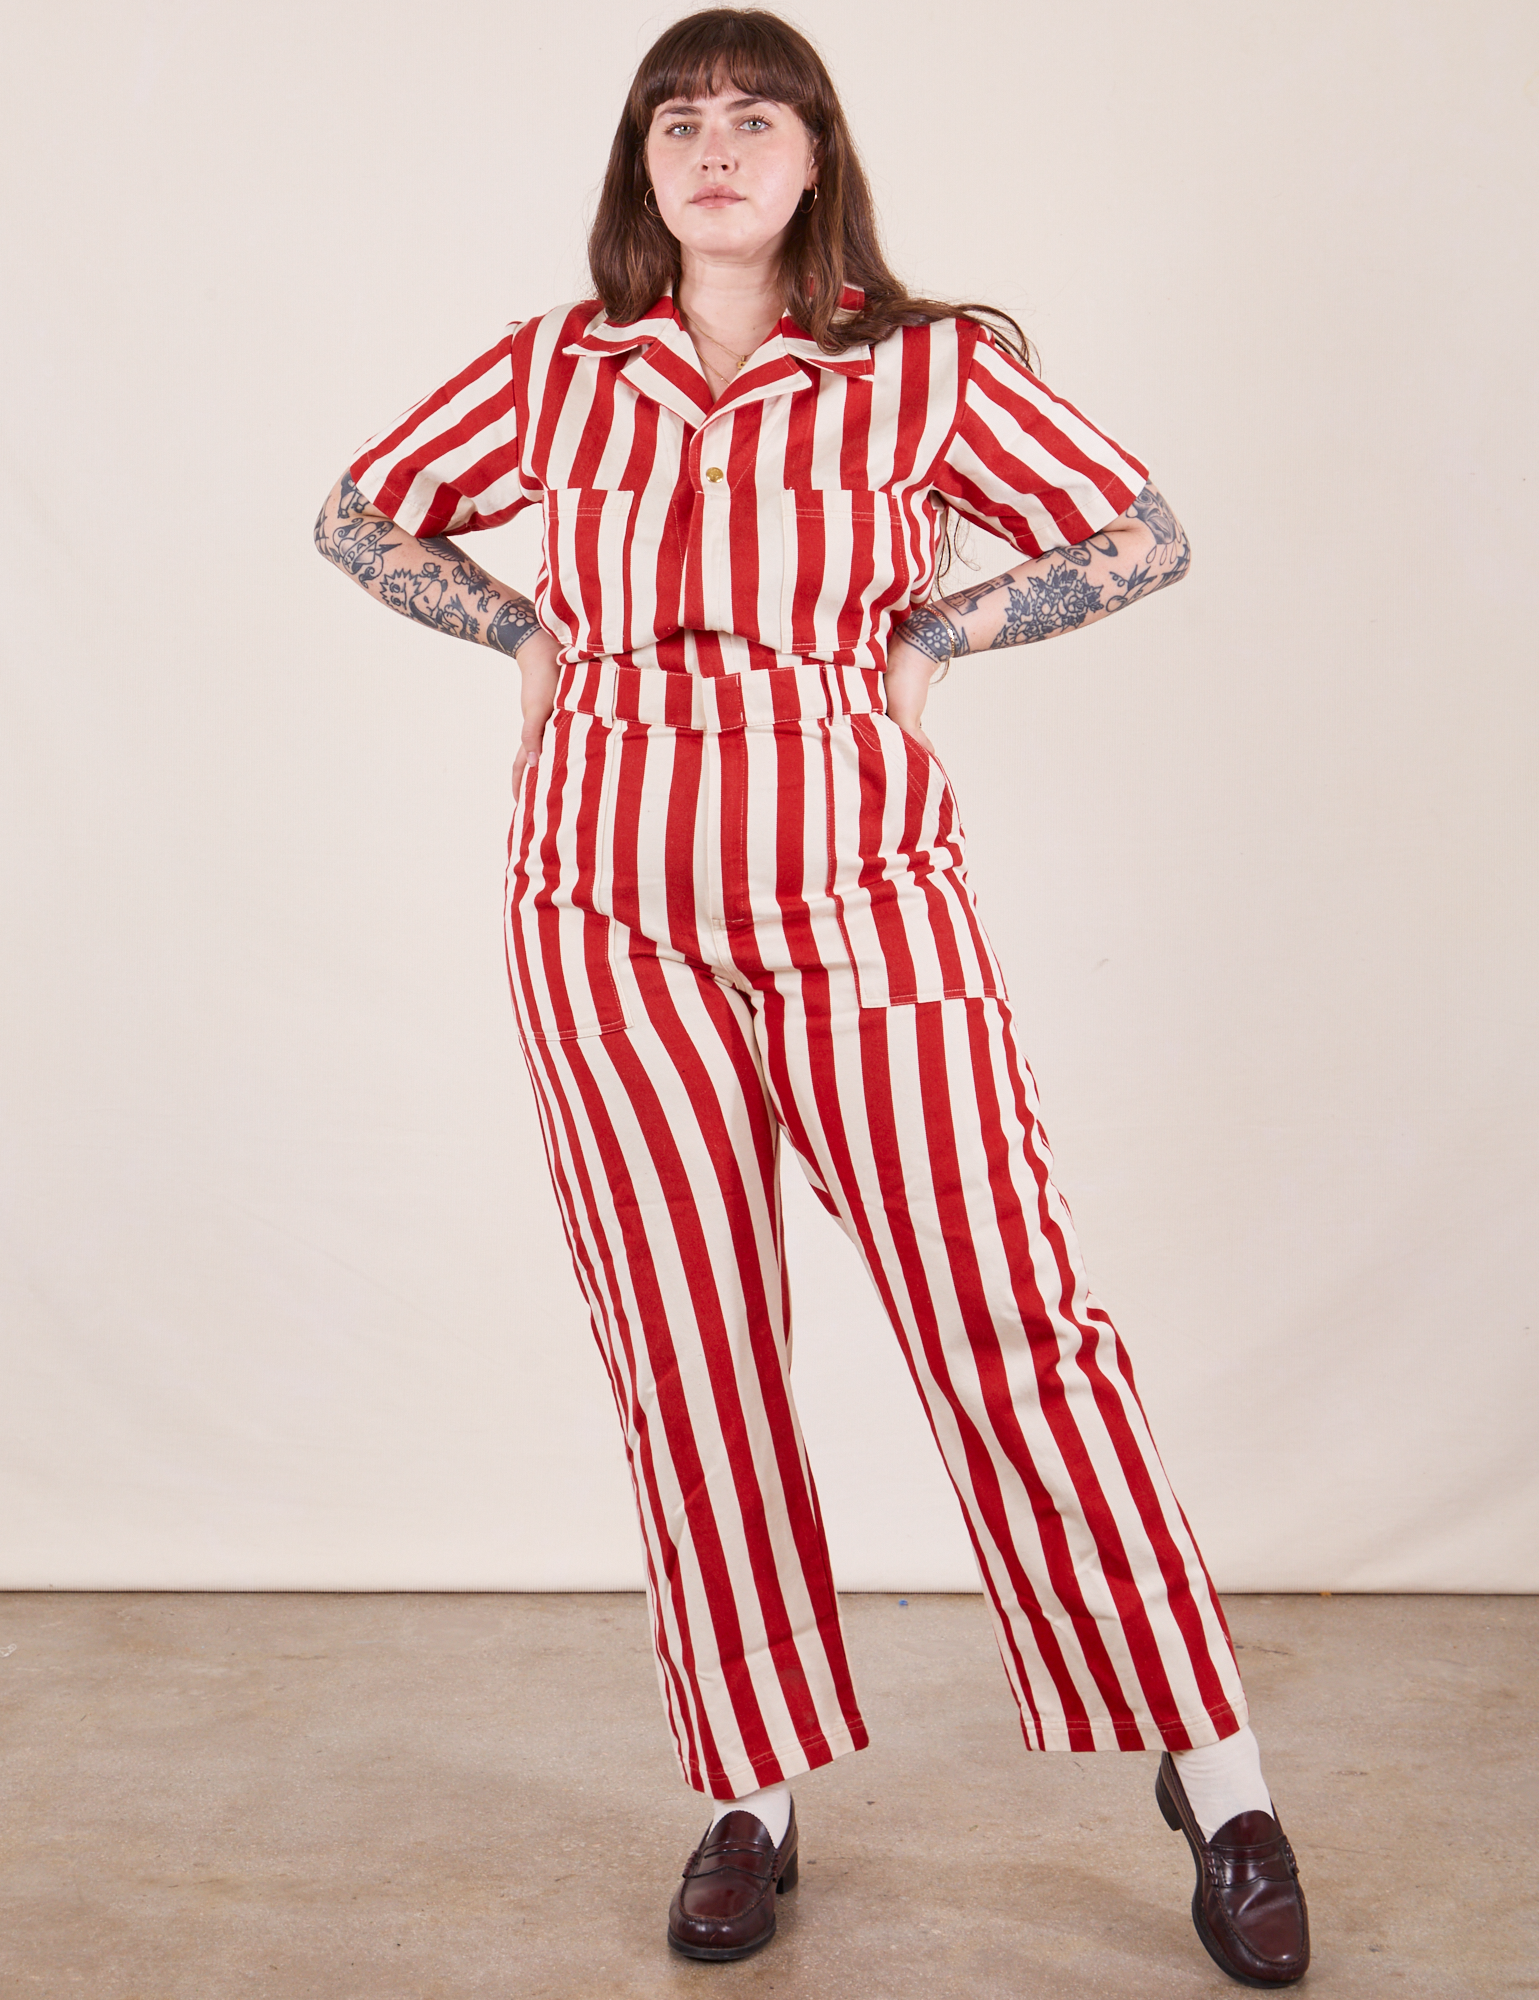 Sydney is 5'9" and wearing L Cherry Stripe Jumpsuit